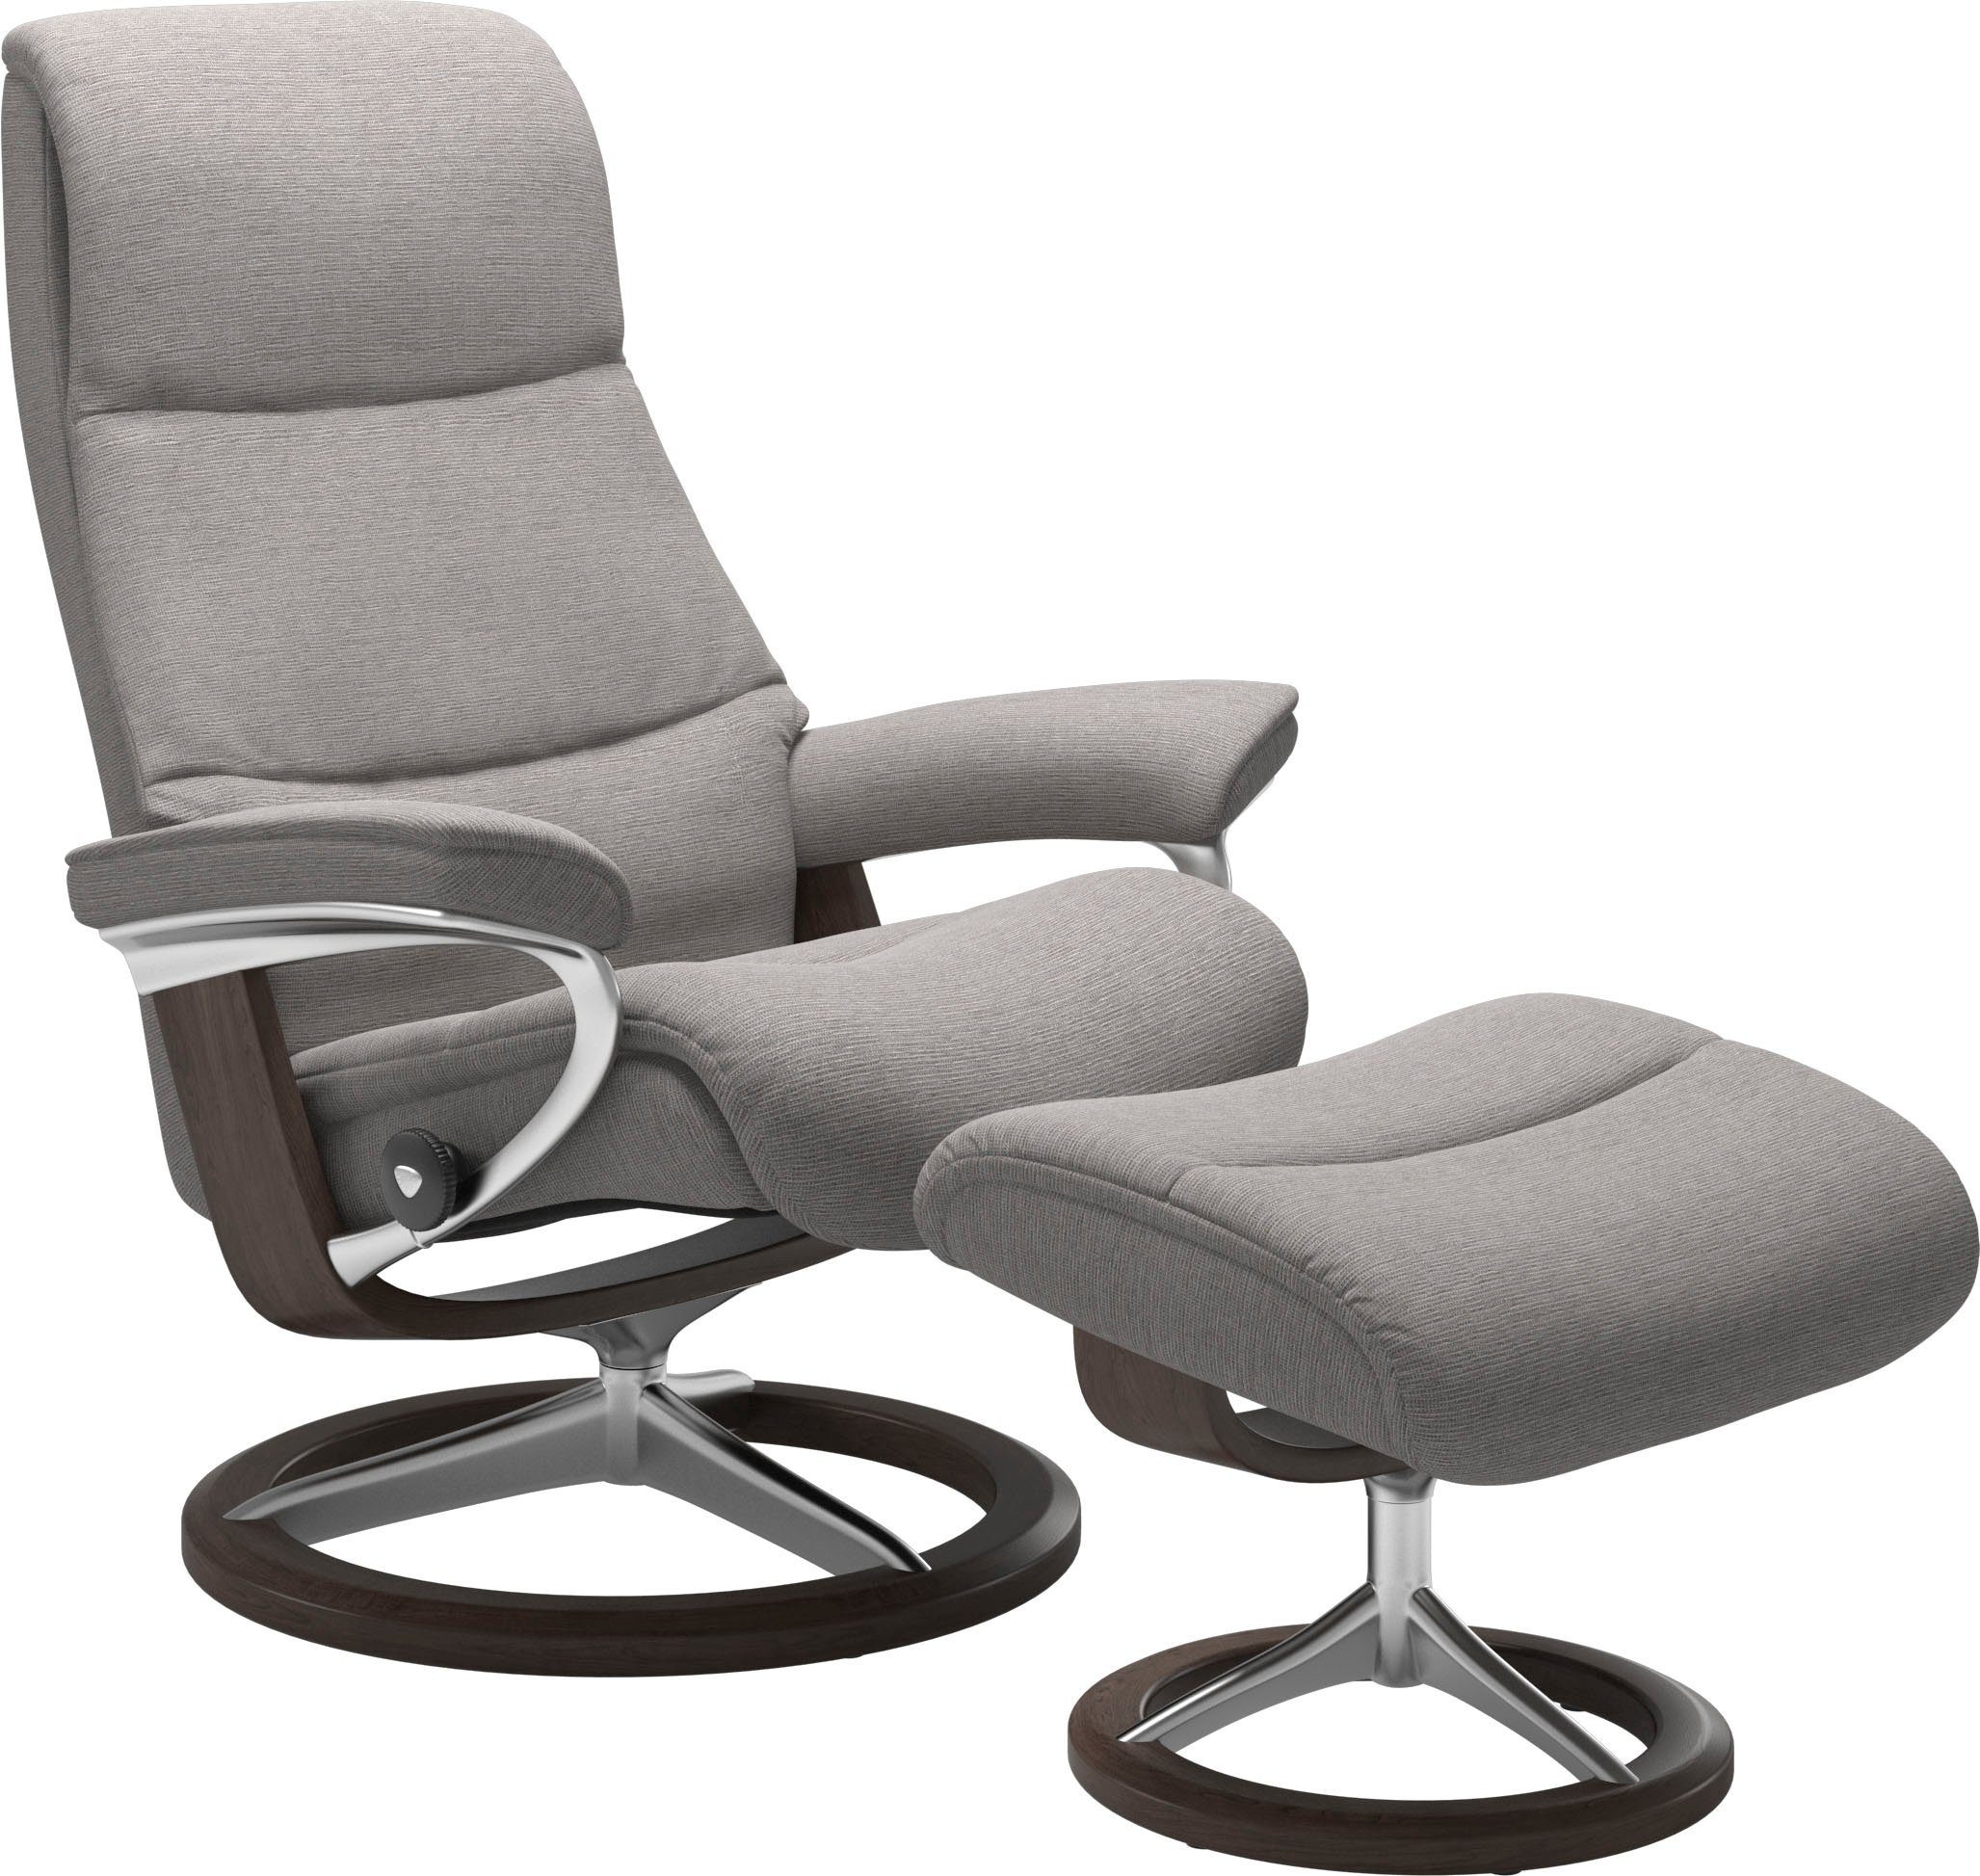 Stressless® Relaxsessel View, mit Signature Base, Größe S,Gestell Wenge | Funktionssessel